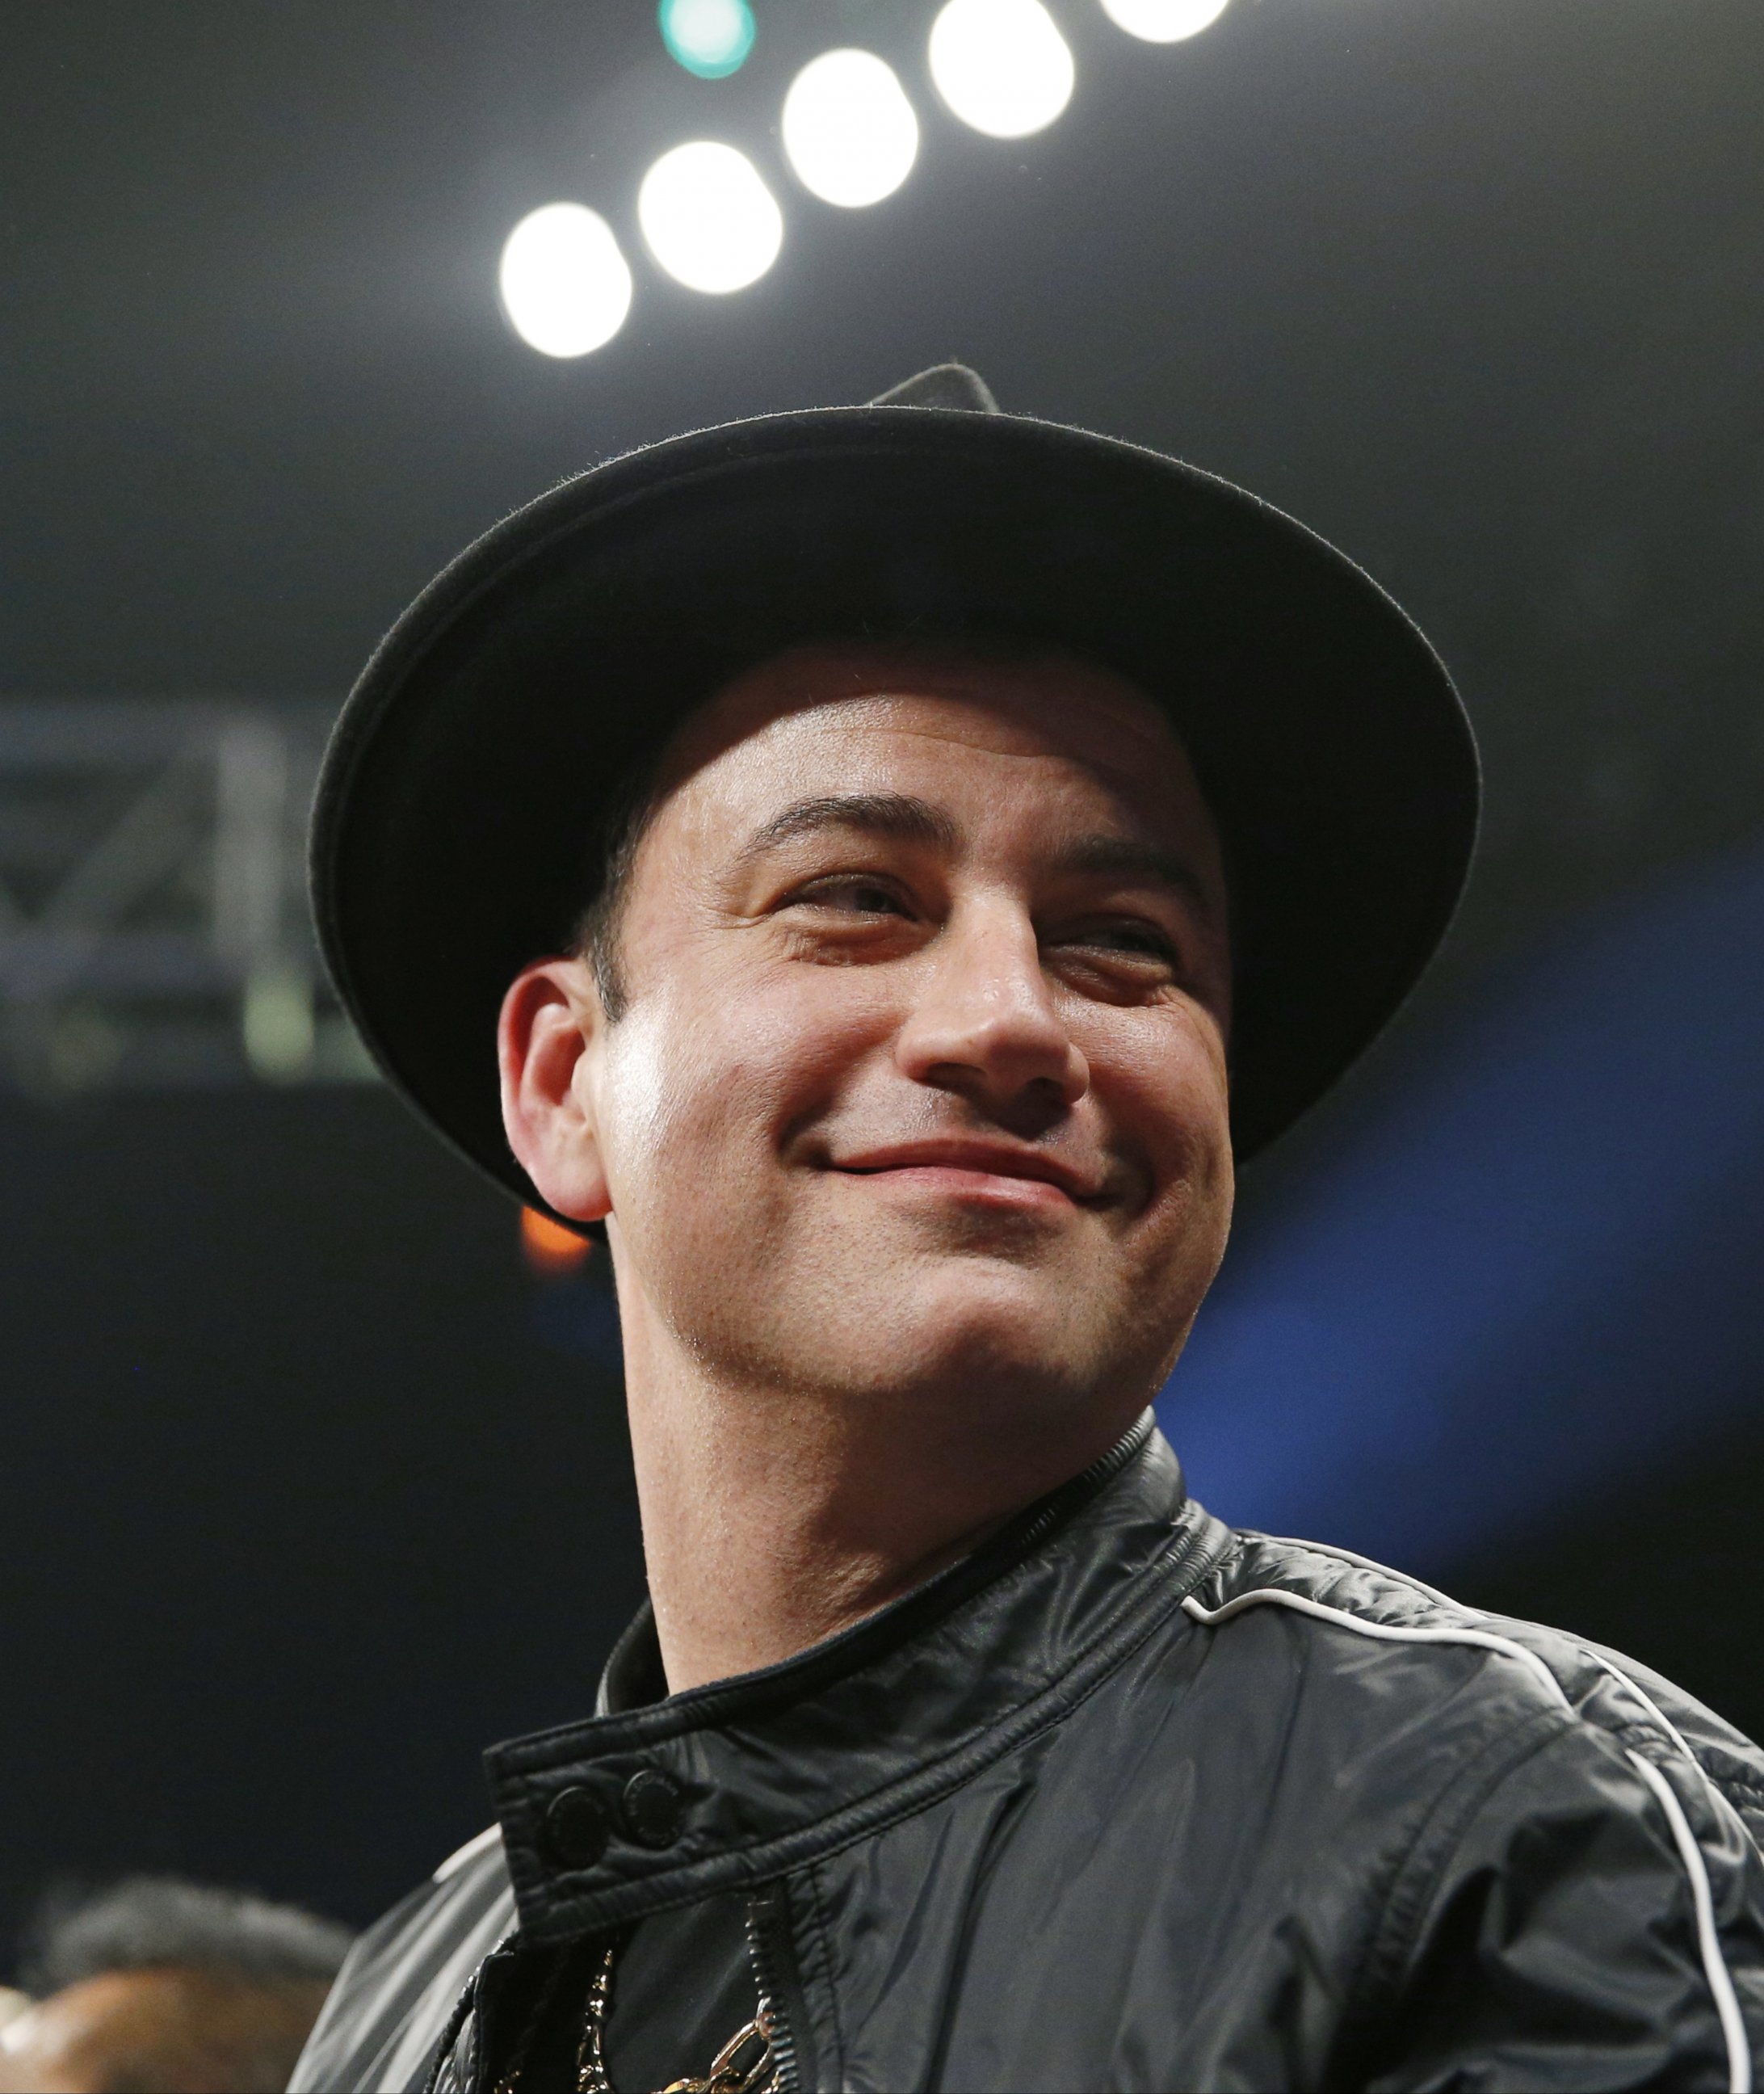 PHOTO: Comedian Jimmy Kimmel joins the crowd before the start of the world welterweight championship bout between Floyd Mayweather Jr., and Manny Pacquiao, on Saturday, May 2, 2015 in Las Vegas. 